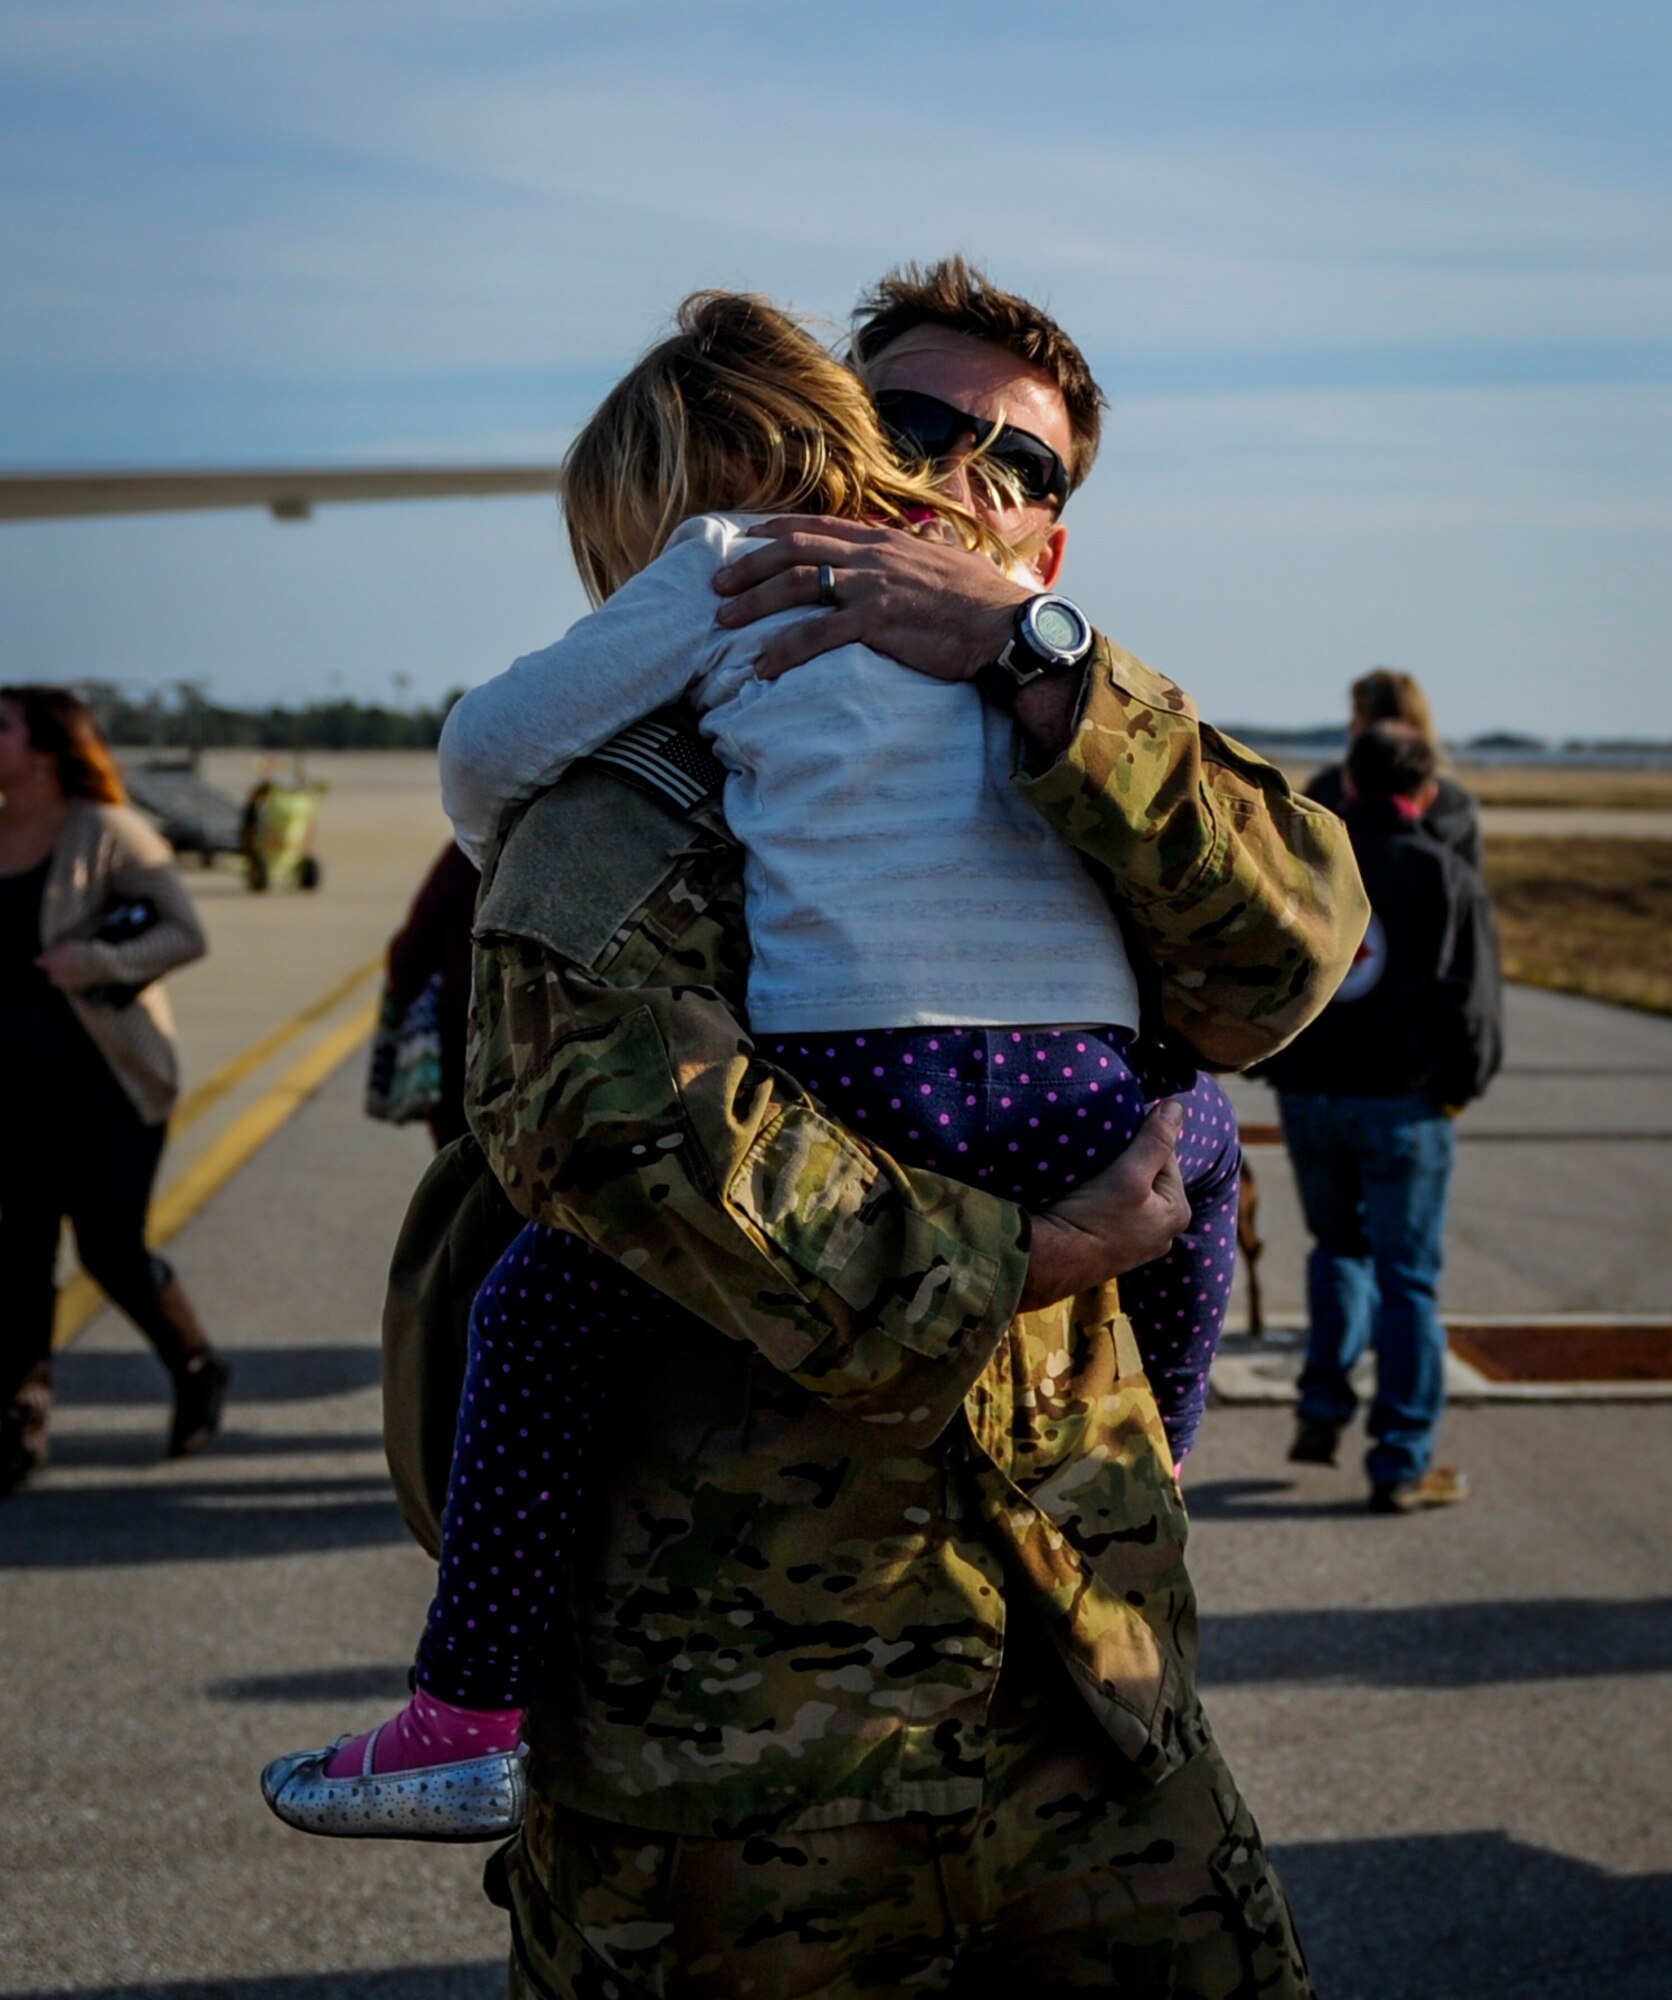 Tech. Sgt. Jeff Hieber, 4th Special Operations Squadron sensor operator embraces his daughter, Elliot, during Operation Homecoming Dec. 11, 2014, after returning to Hurlburt Field, Fla. from a deployment. Operation Homecoming welcomed home more than 40 Air Commandos. (U.S. Air Force photo/Senior Airman Christopher Callaway)